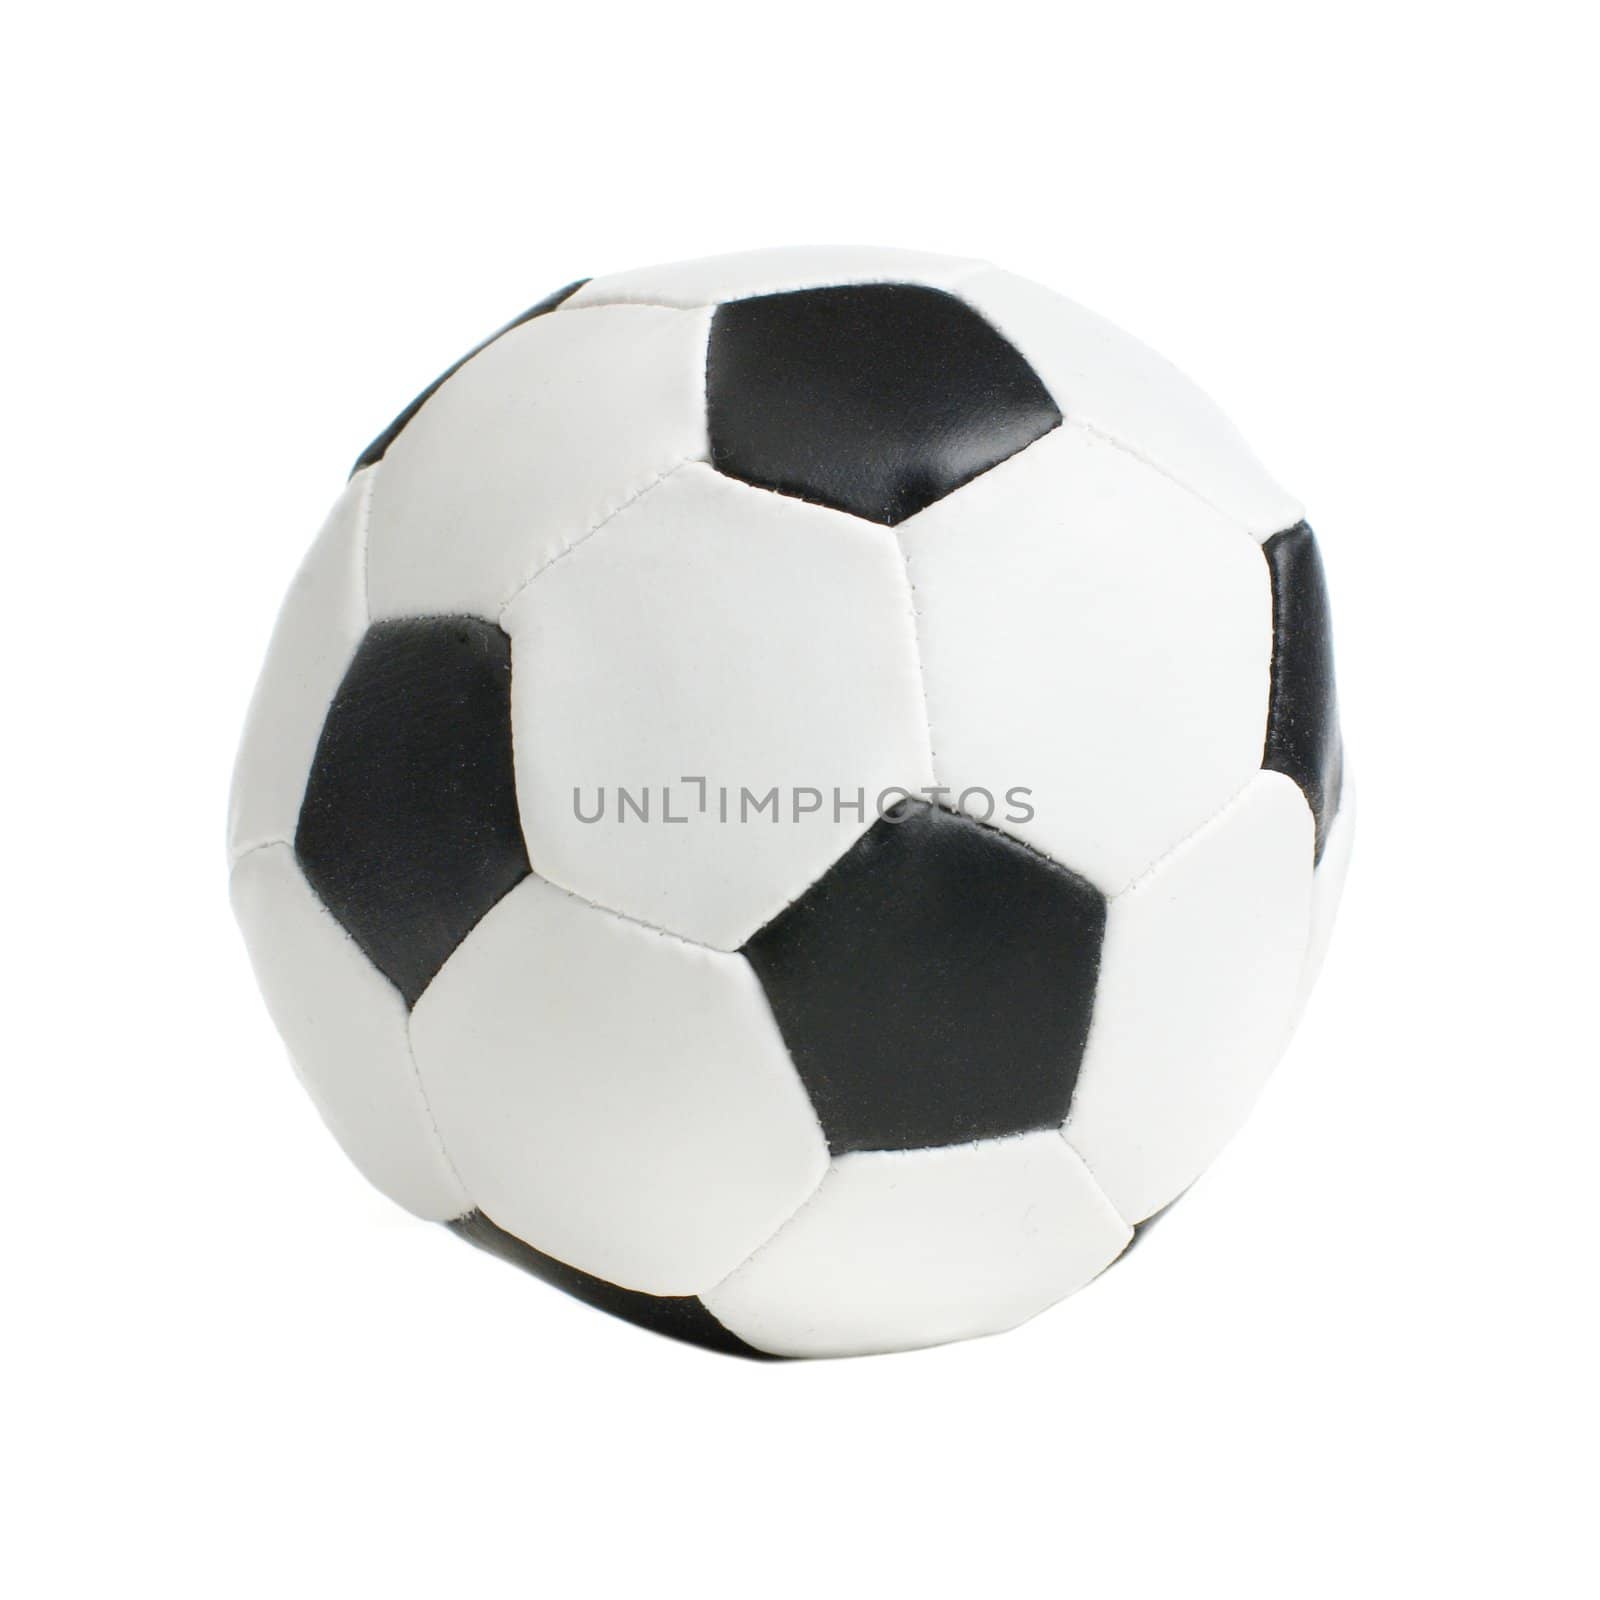 Football / soccer ball on a white background.